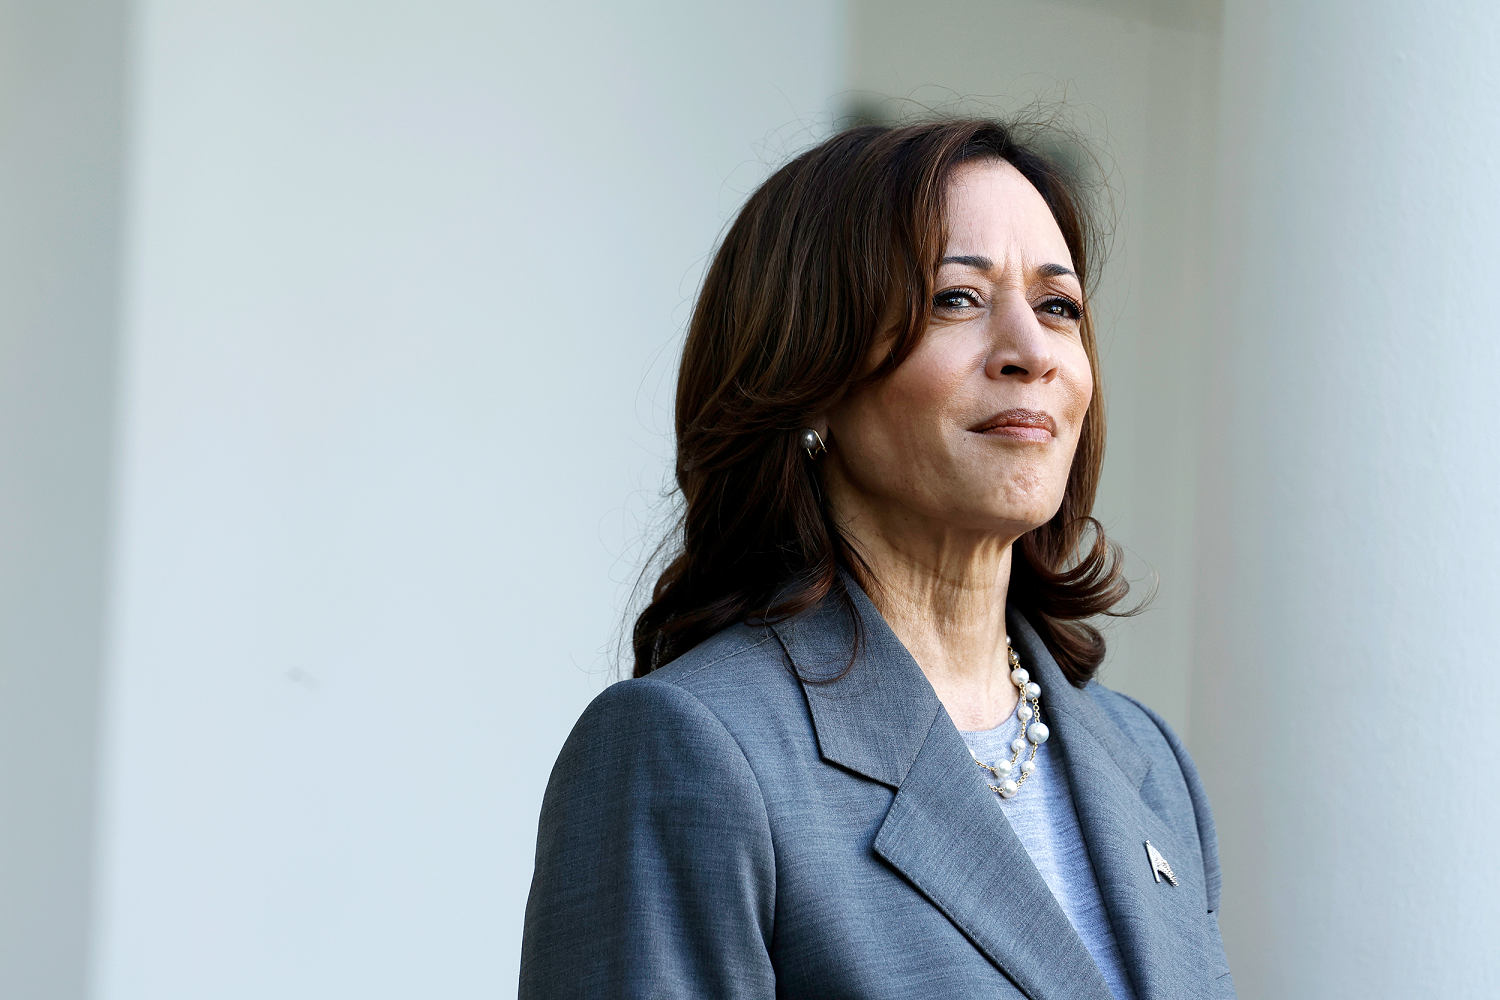 Harris aims to open Silicon Valley checkbooks after tech donors had drifted to Trump